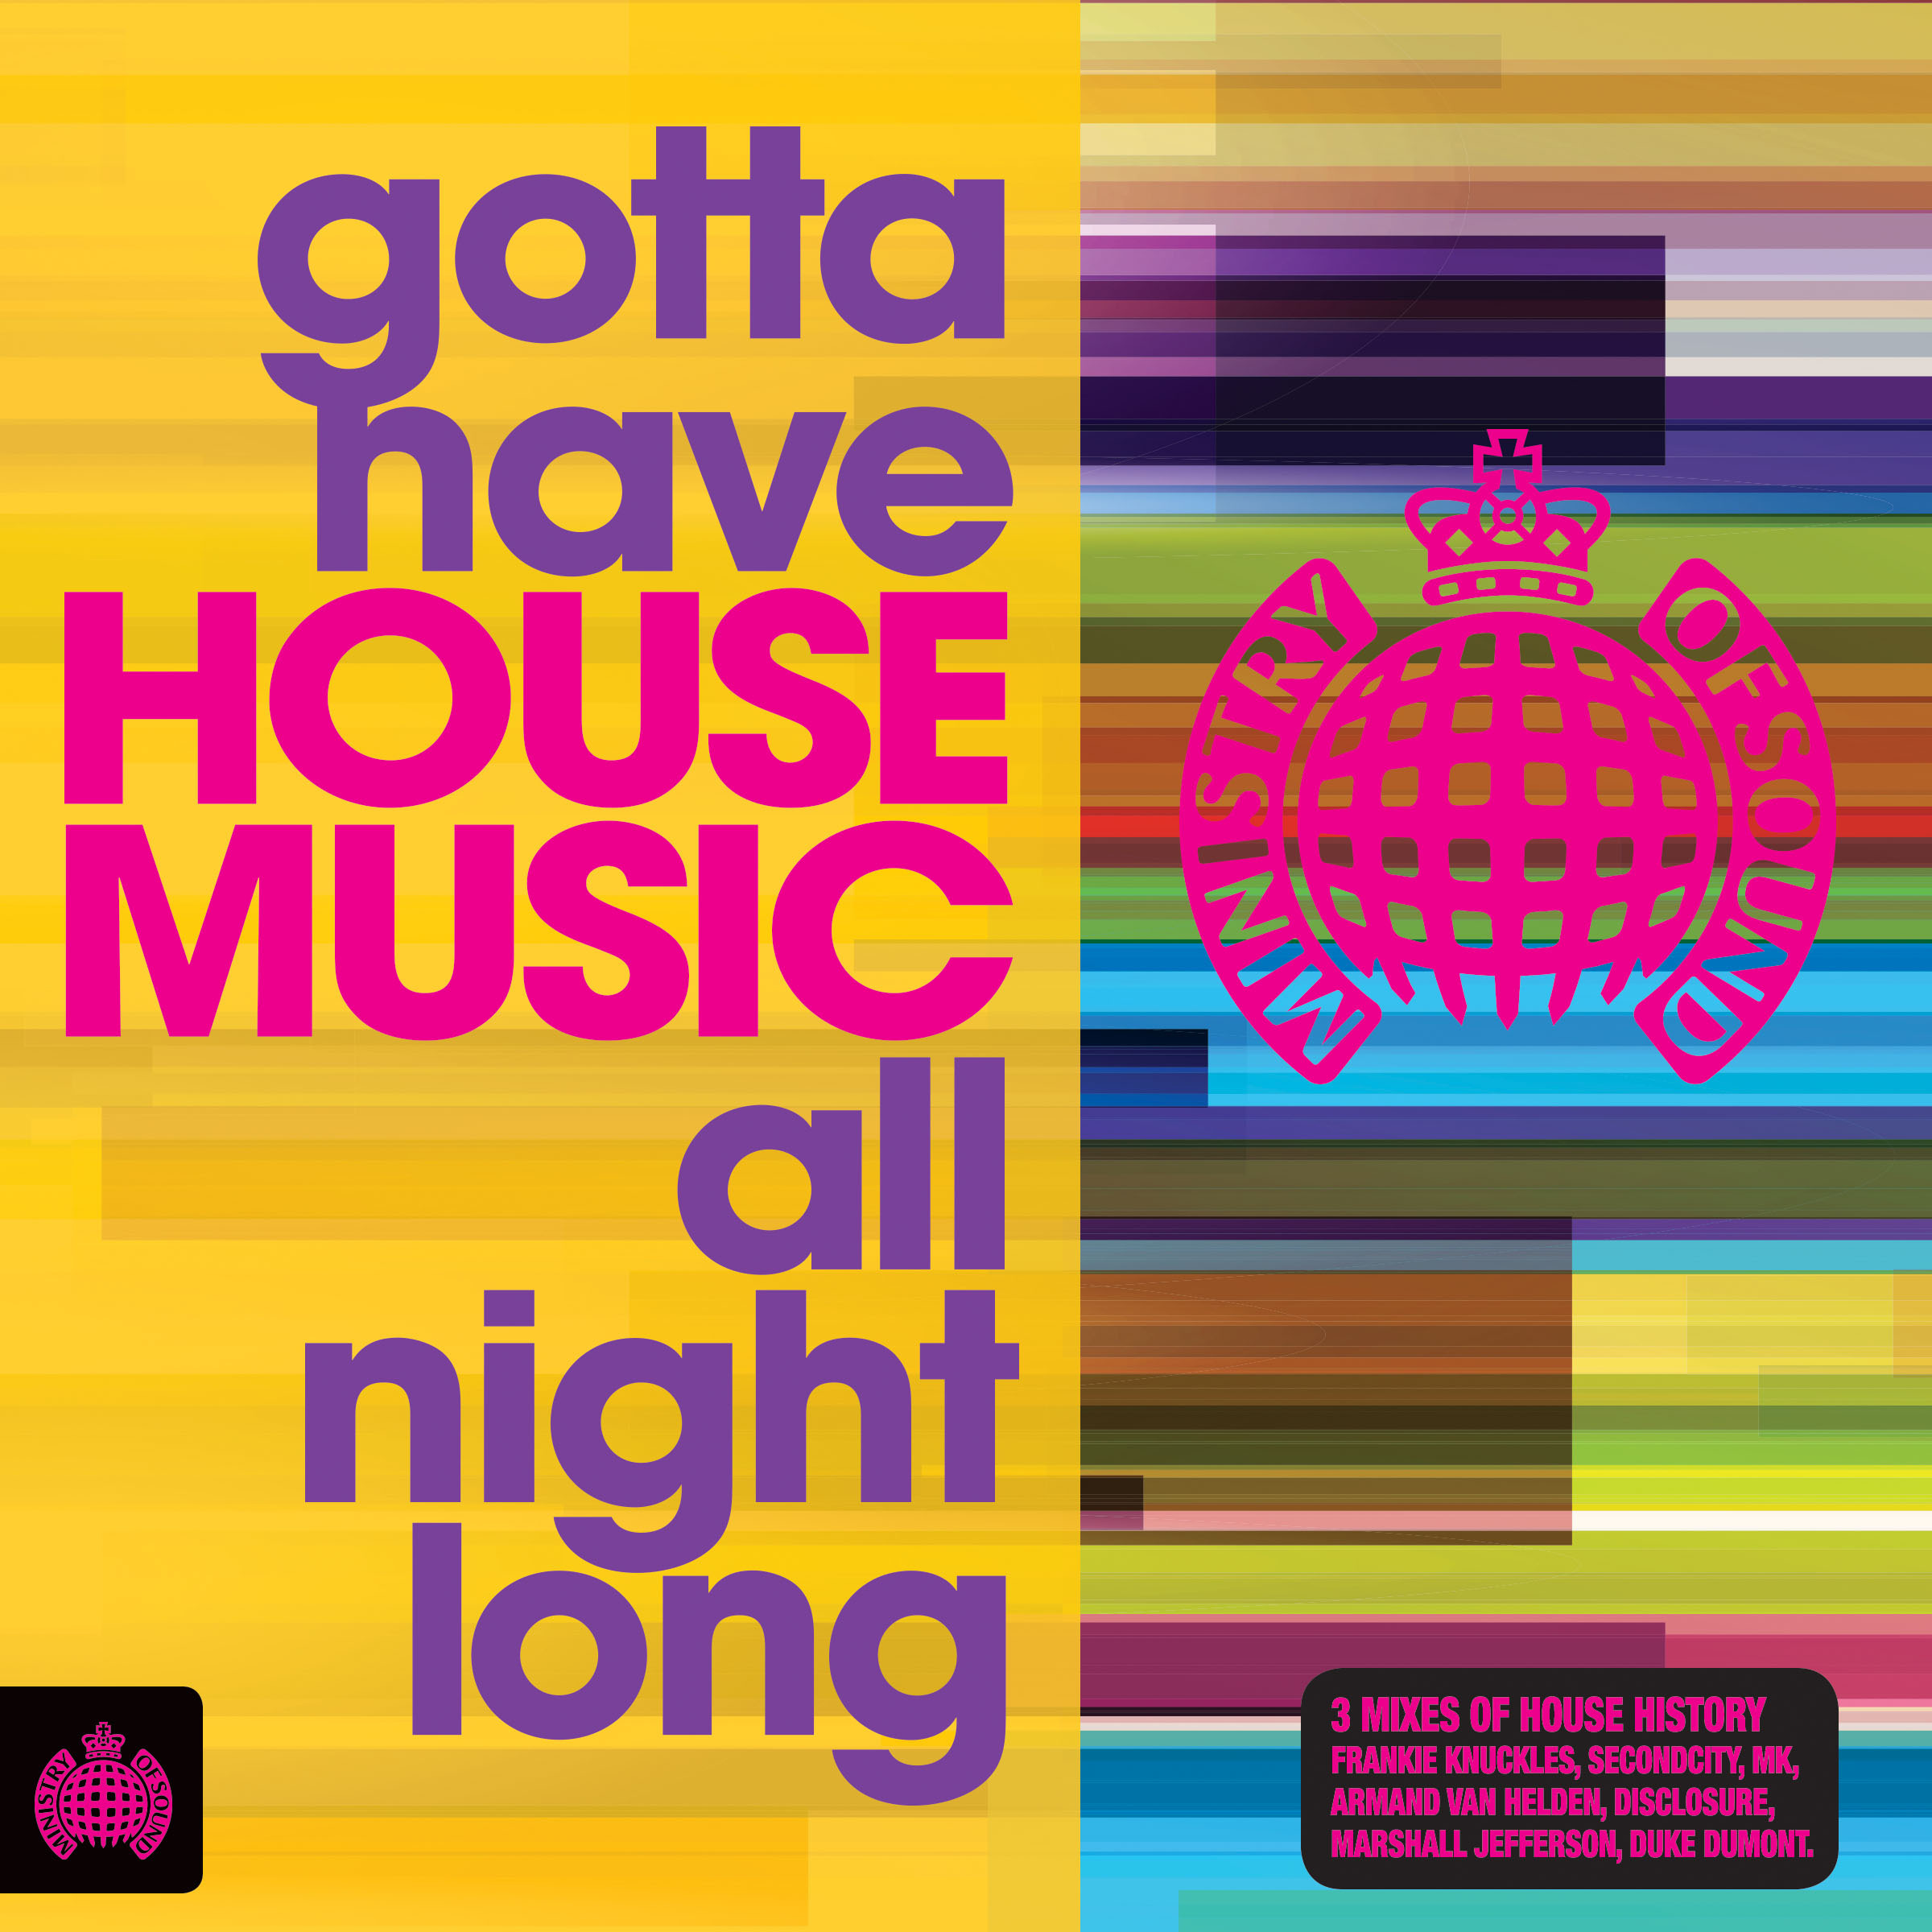 GOTTA HAVE HOUSE MUSIC ALL NIGHT LONG cover art